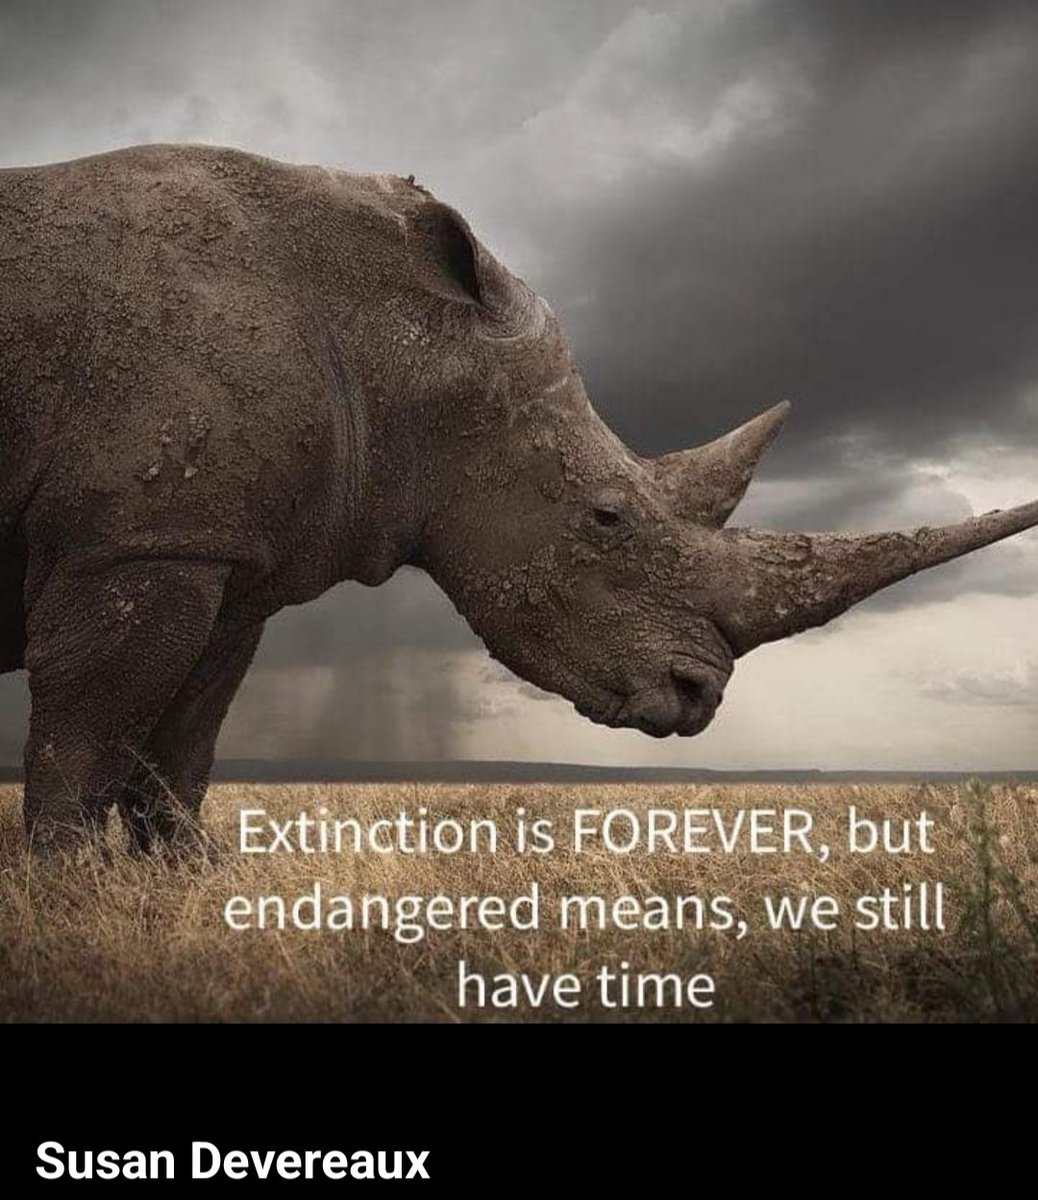 SAVE THE ENDANGERED
SPECIES...

We Have Still Time to Protect the Endangered Species on the Earth, which are Struggling at the Verge of Extinction, If We Have Conservation Consciousness.
        
             GREEN MERCY